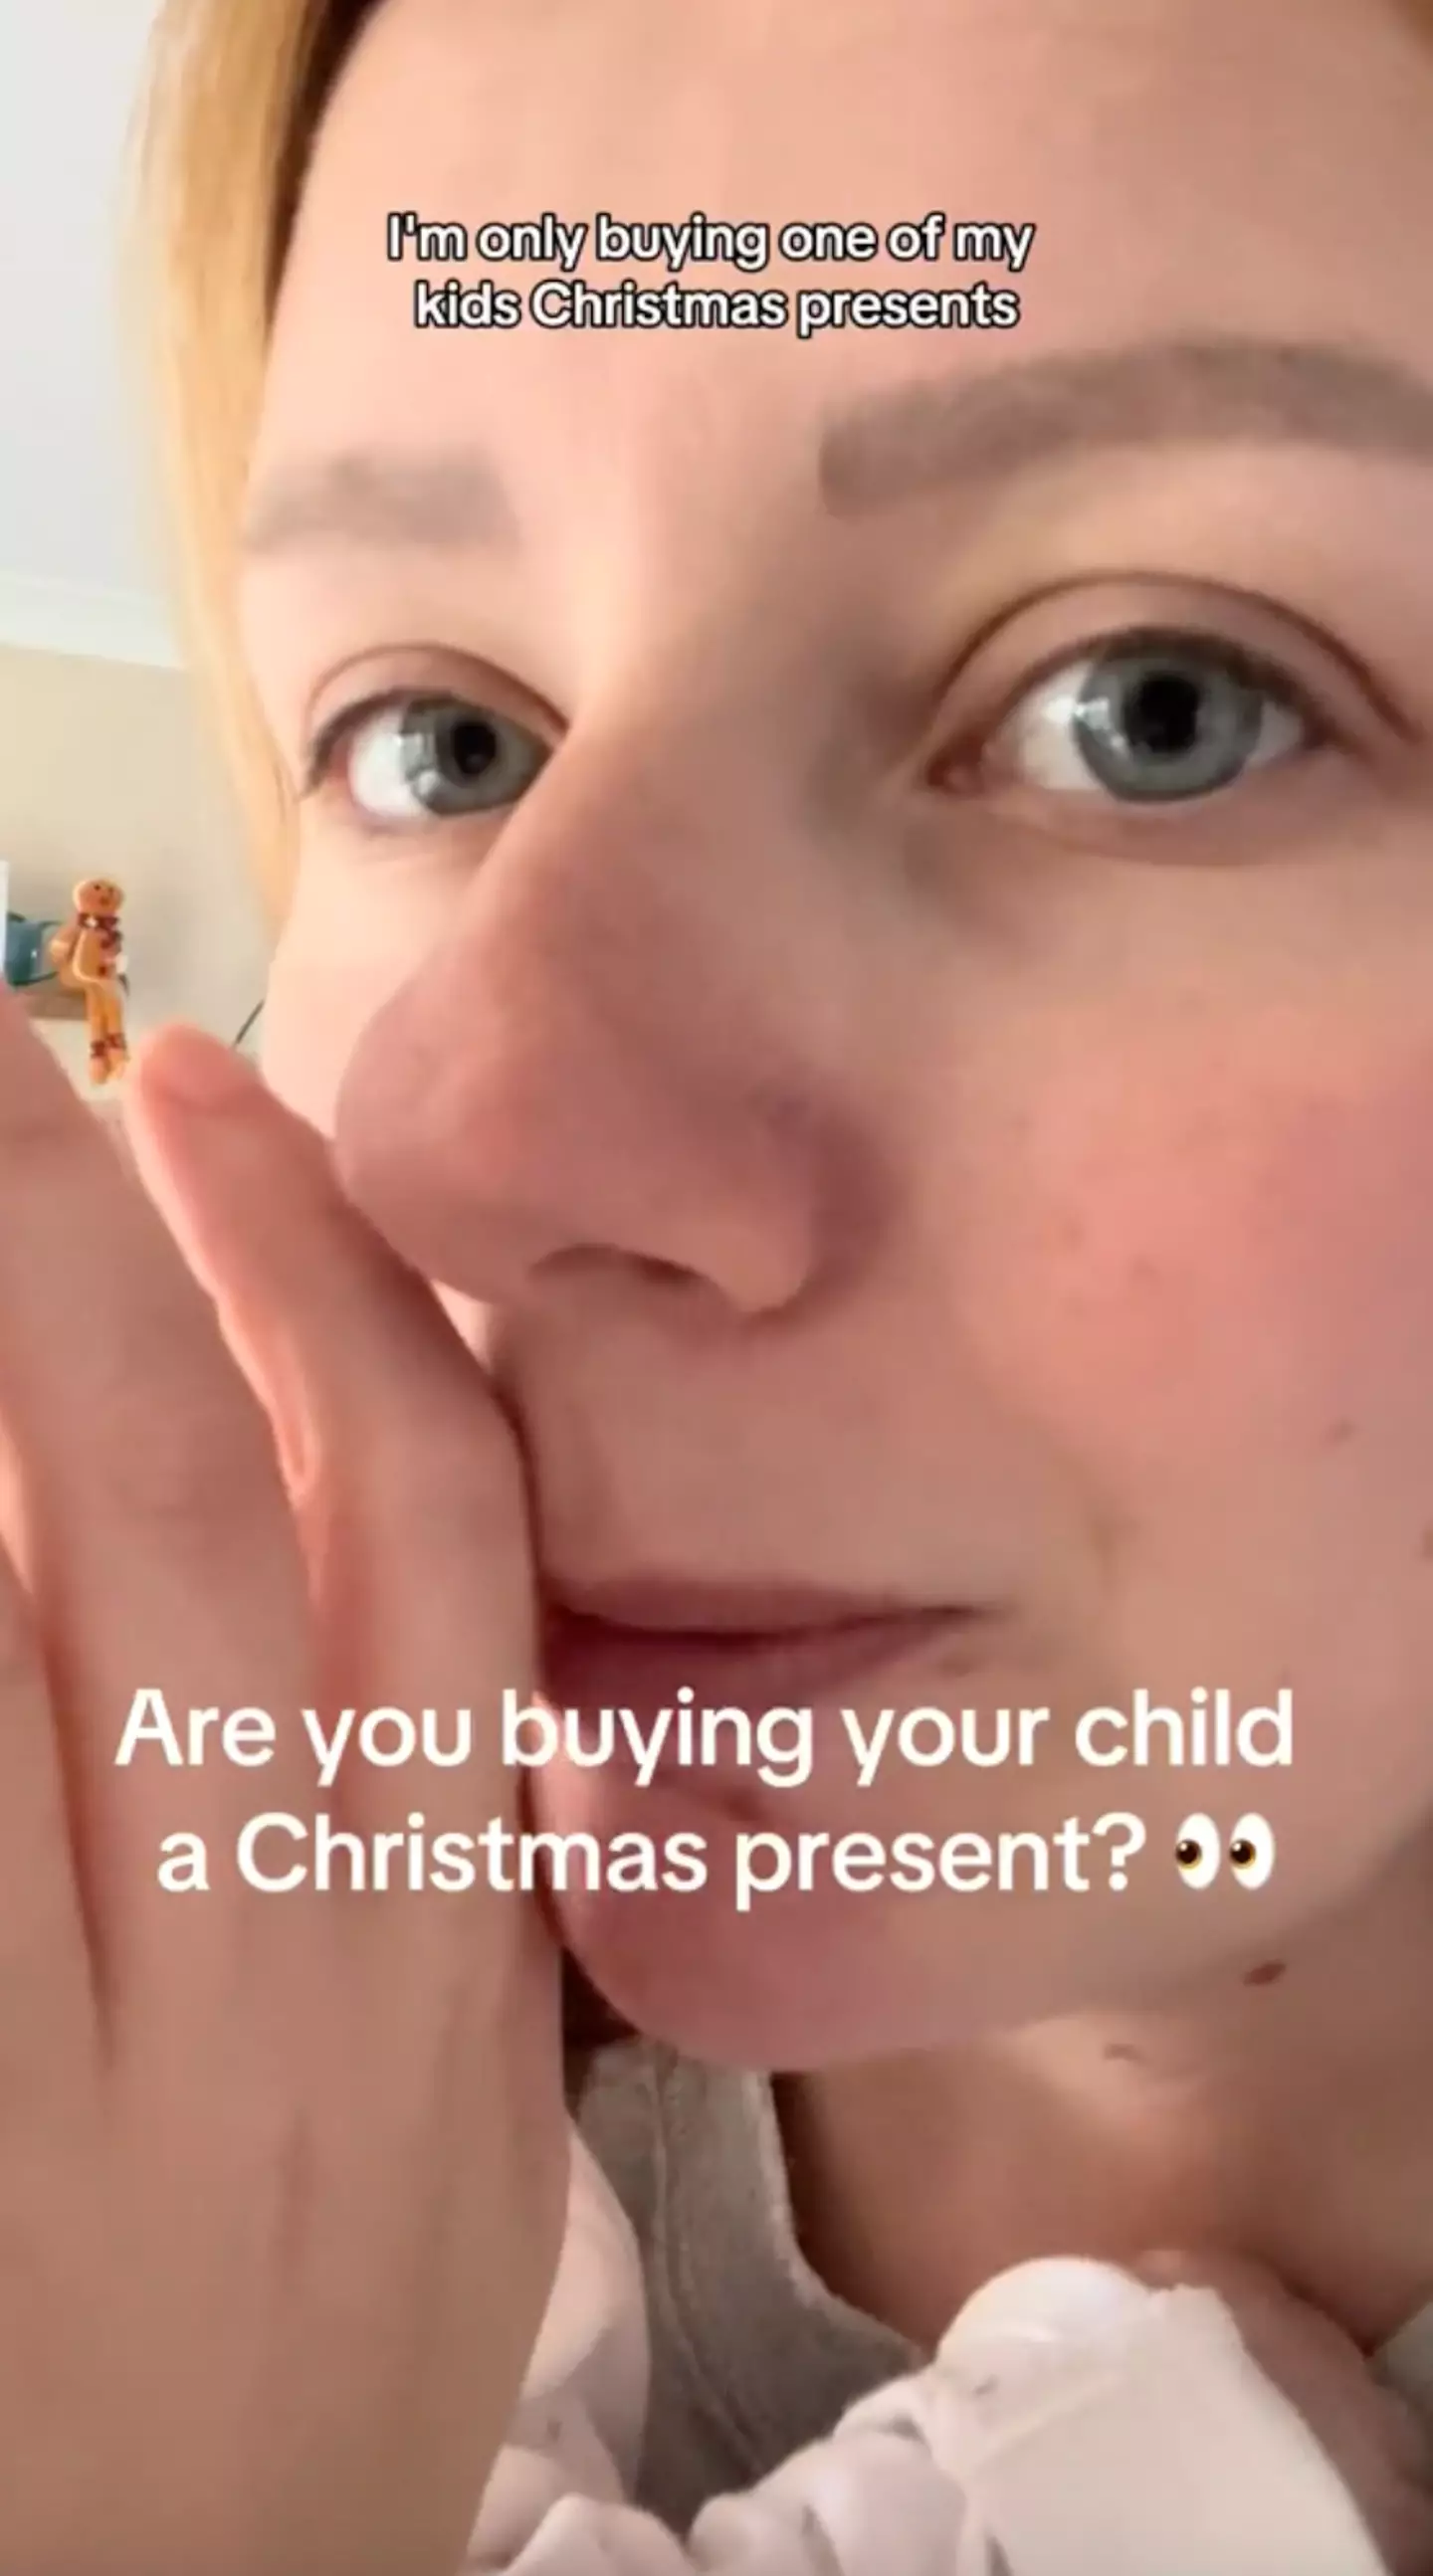 Tiffany explained why she's not getting one of her kids Christmas presents.